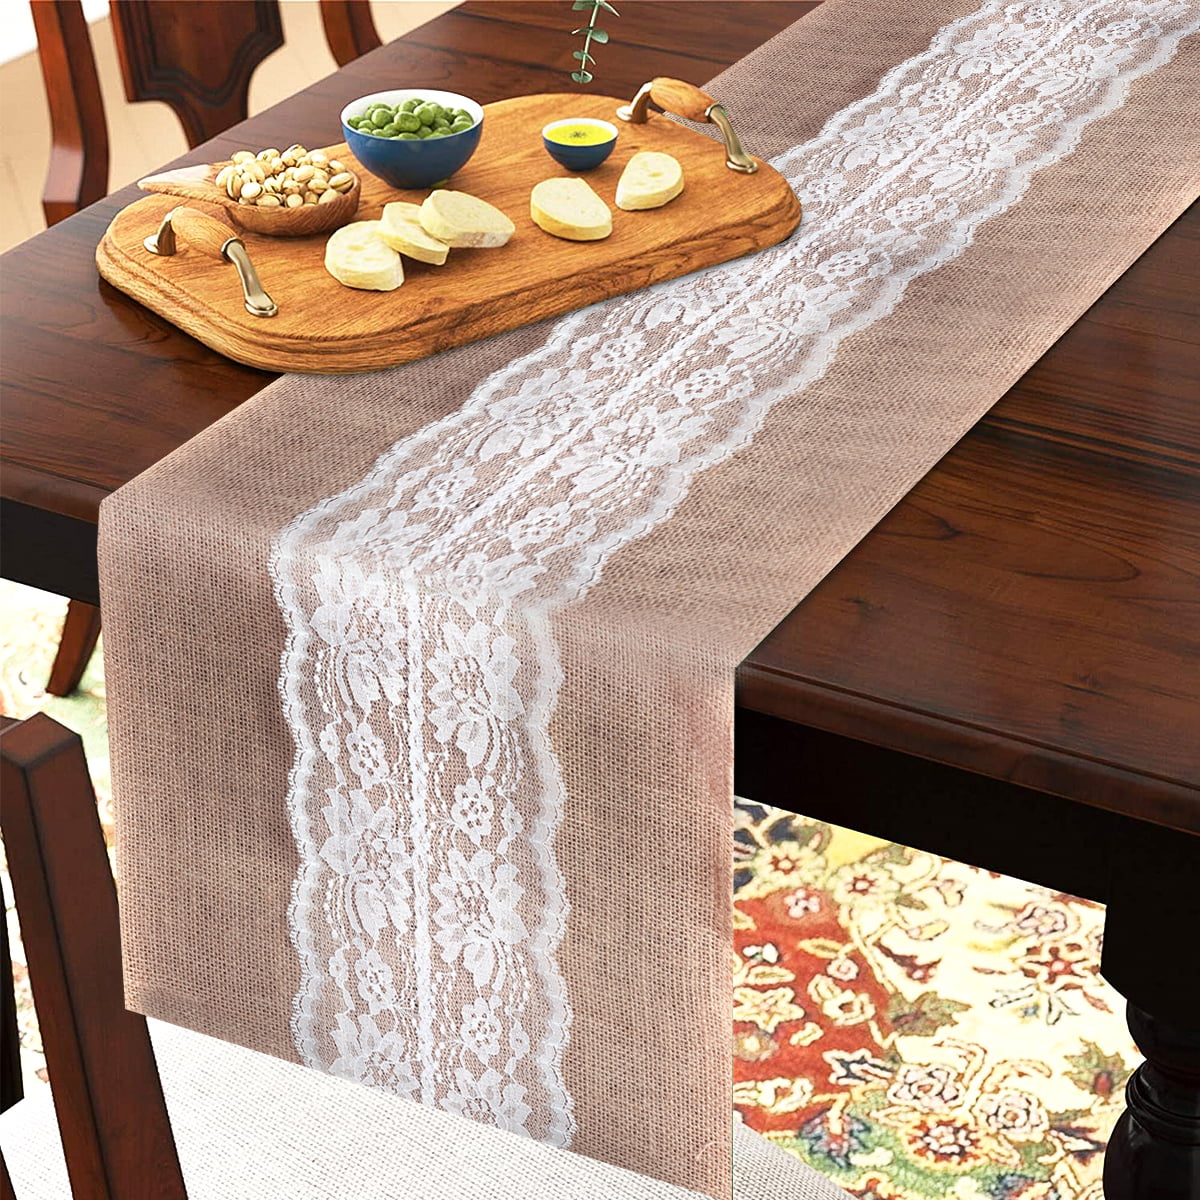 Hessian Burlap Table Runner and with Lace Wedding Cloth Rustic Country Decor 